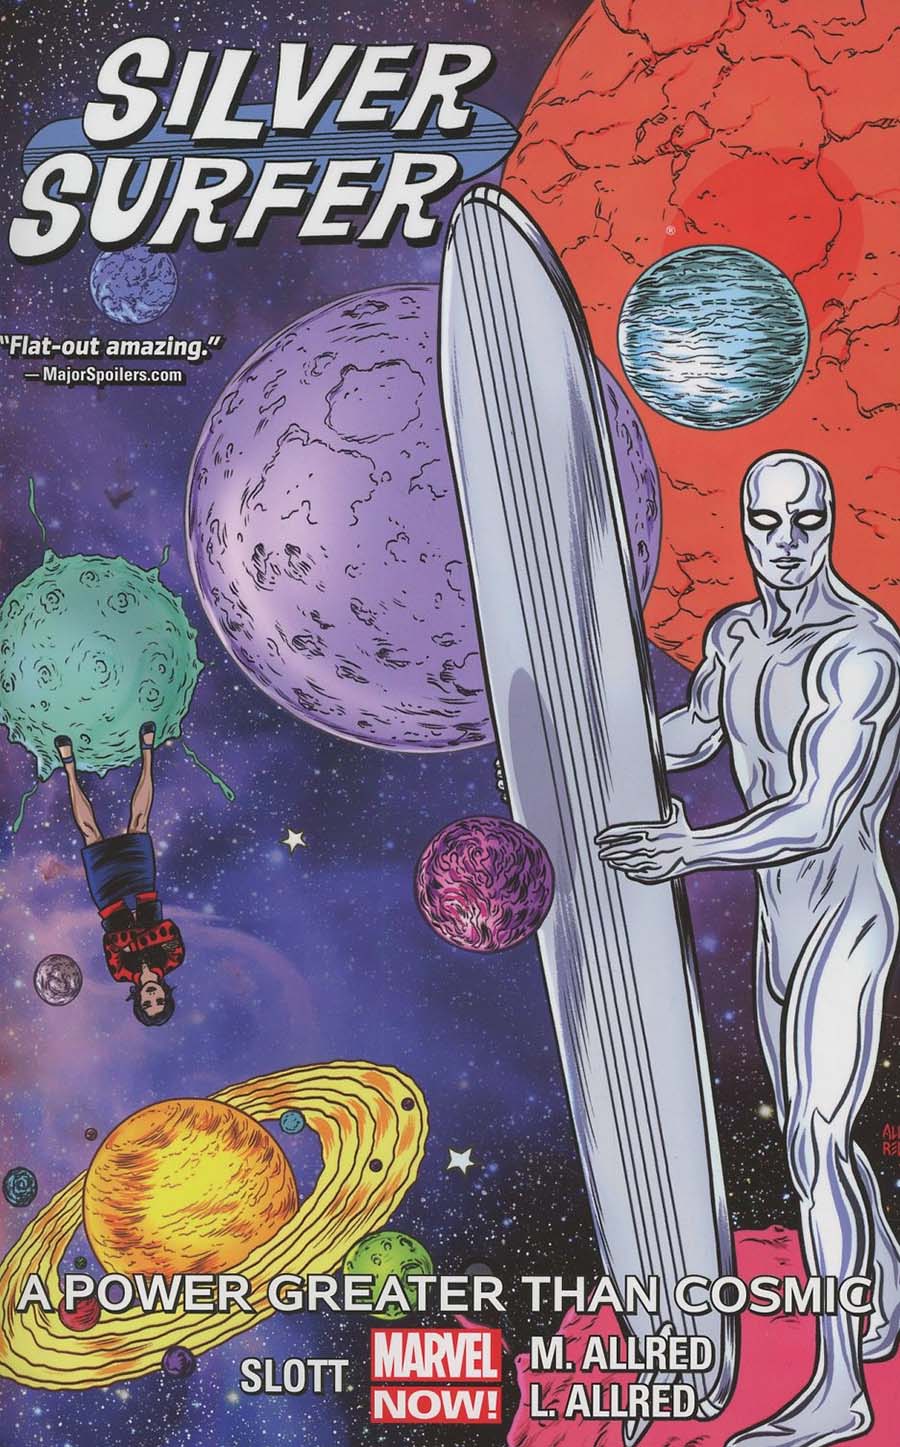 Silver Surfer Vol 5 Power Greater Than Cosmic TP